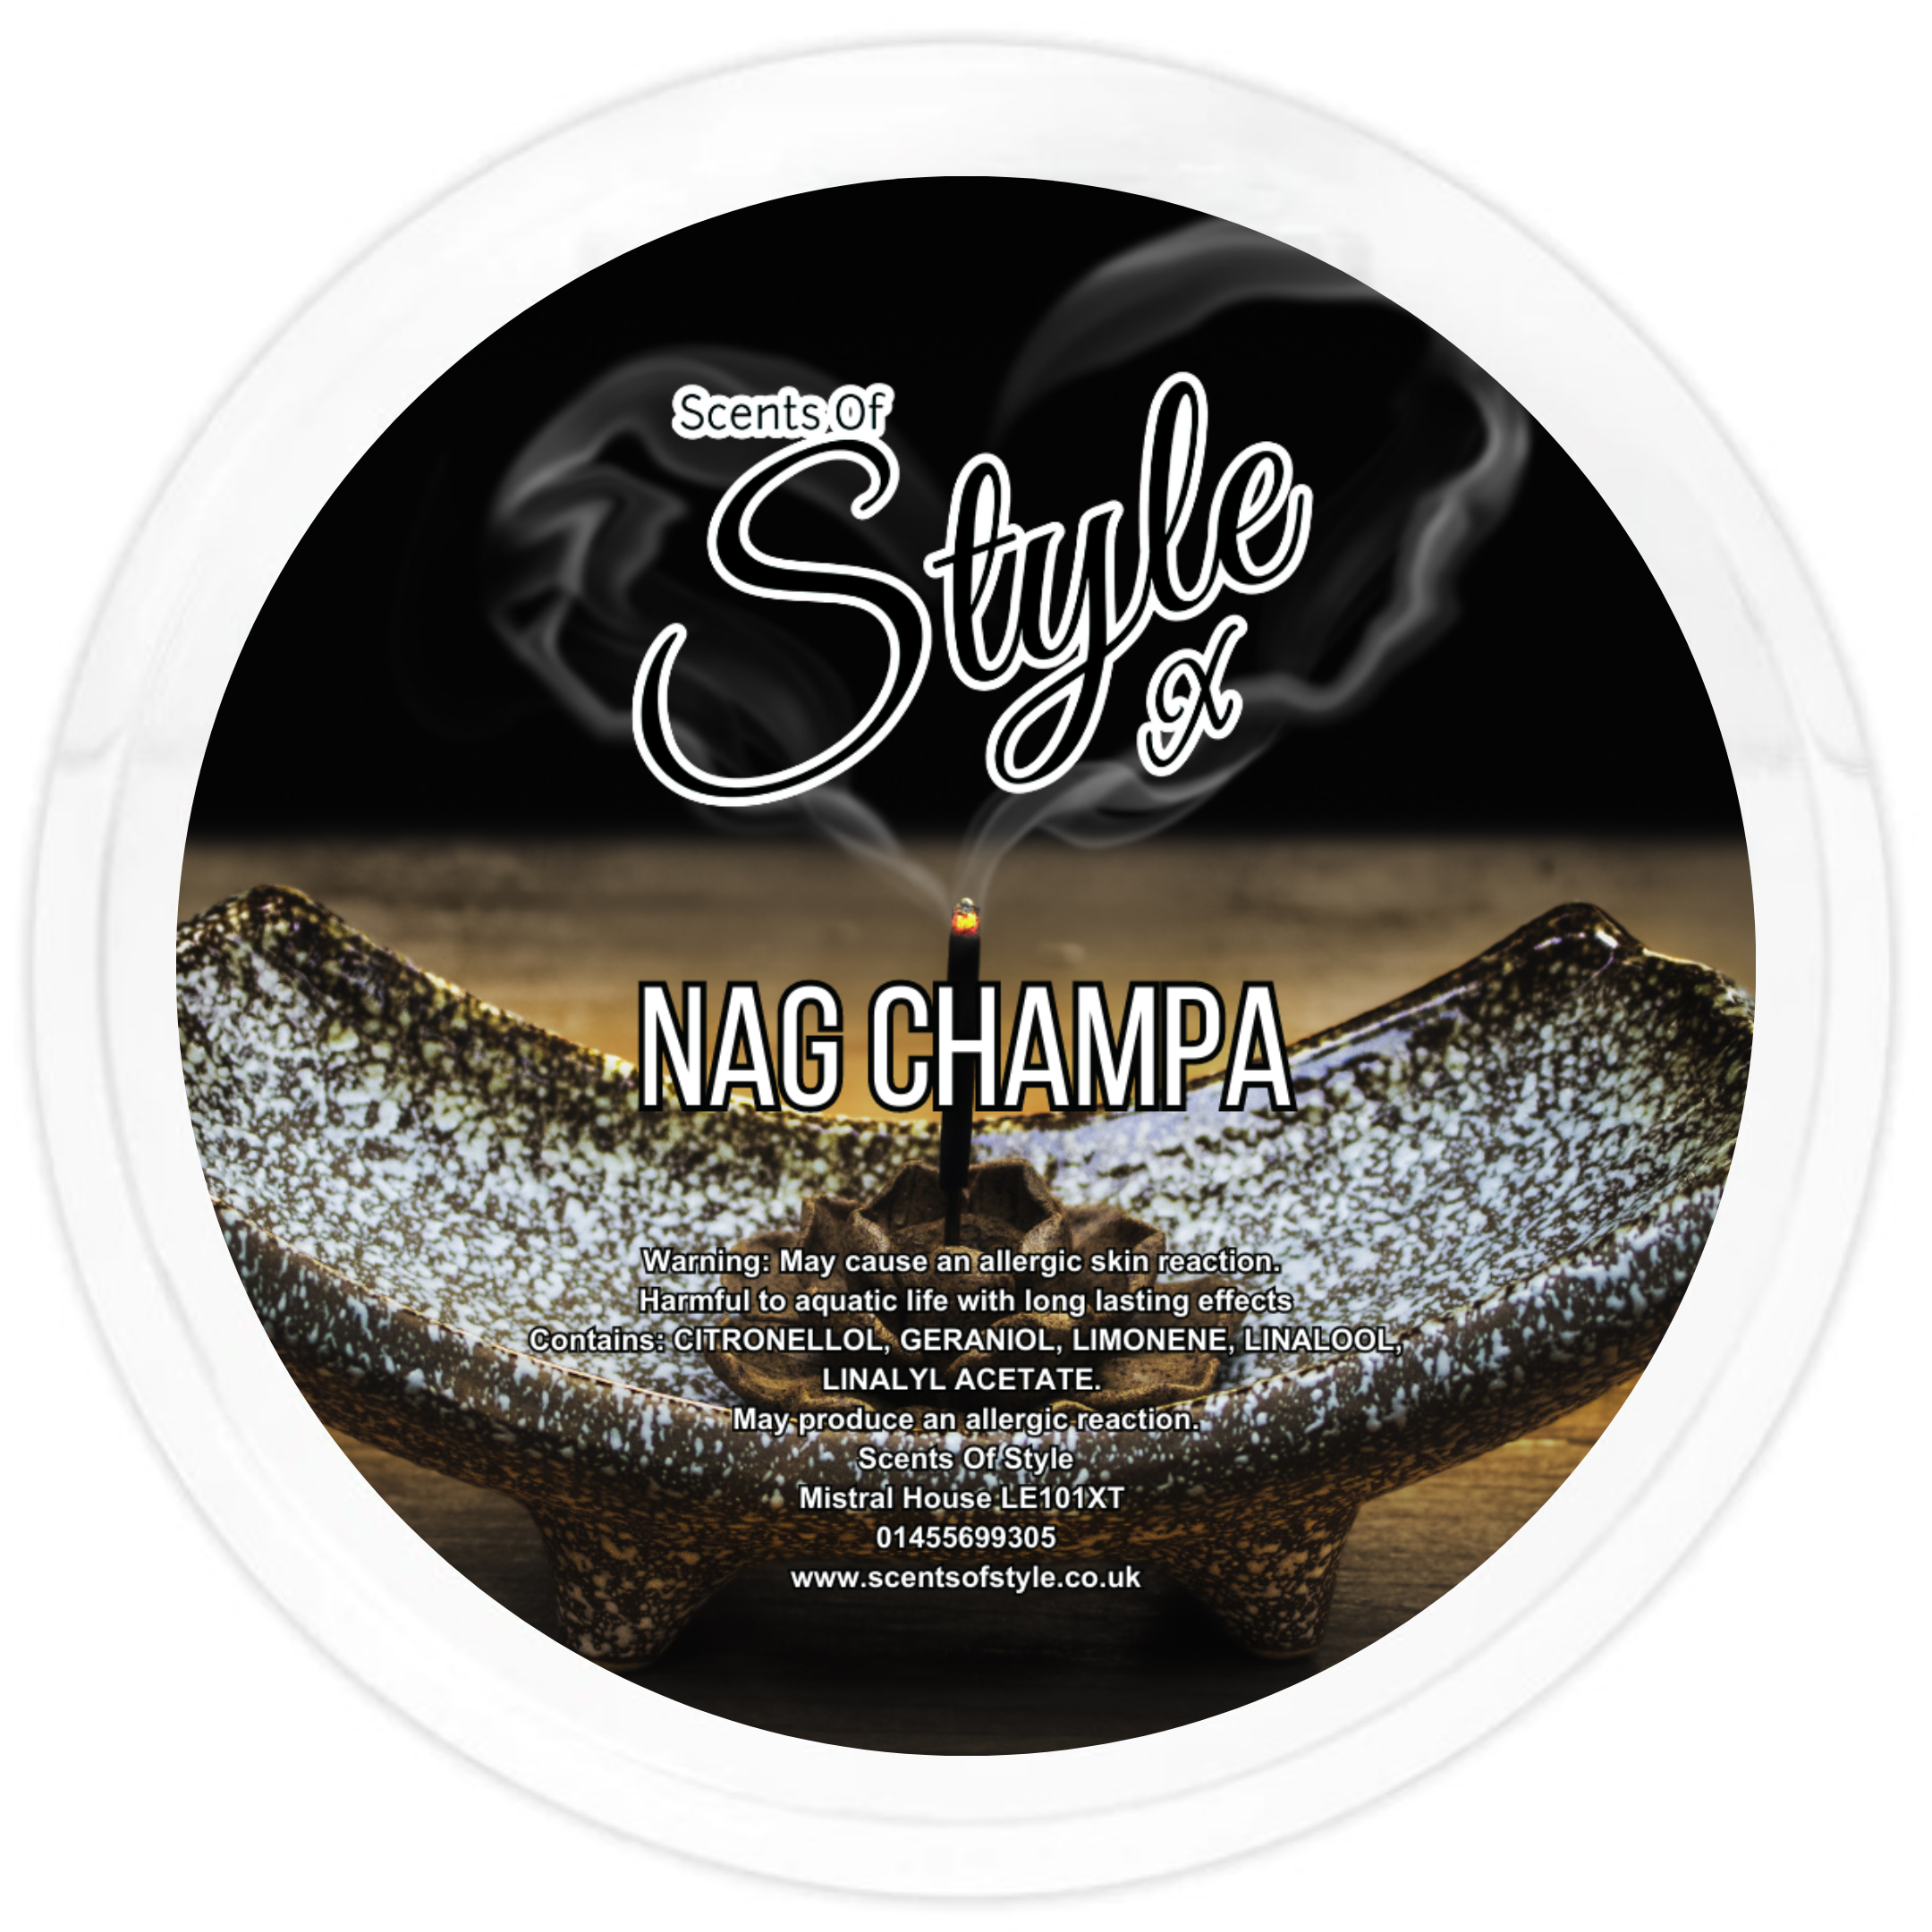 Nag Champa – Scents Of Style